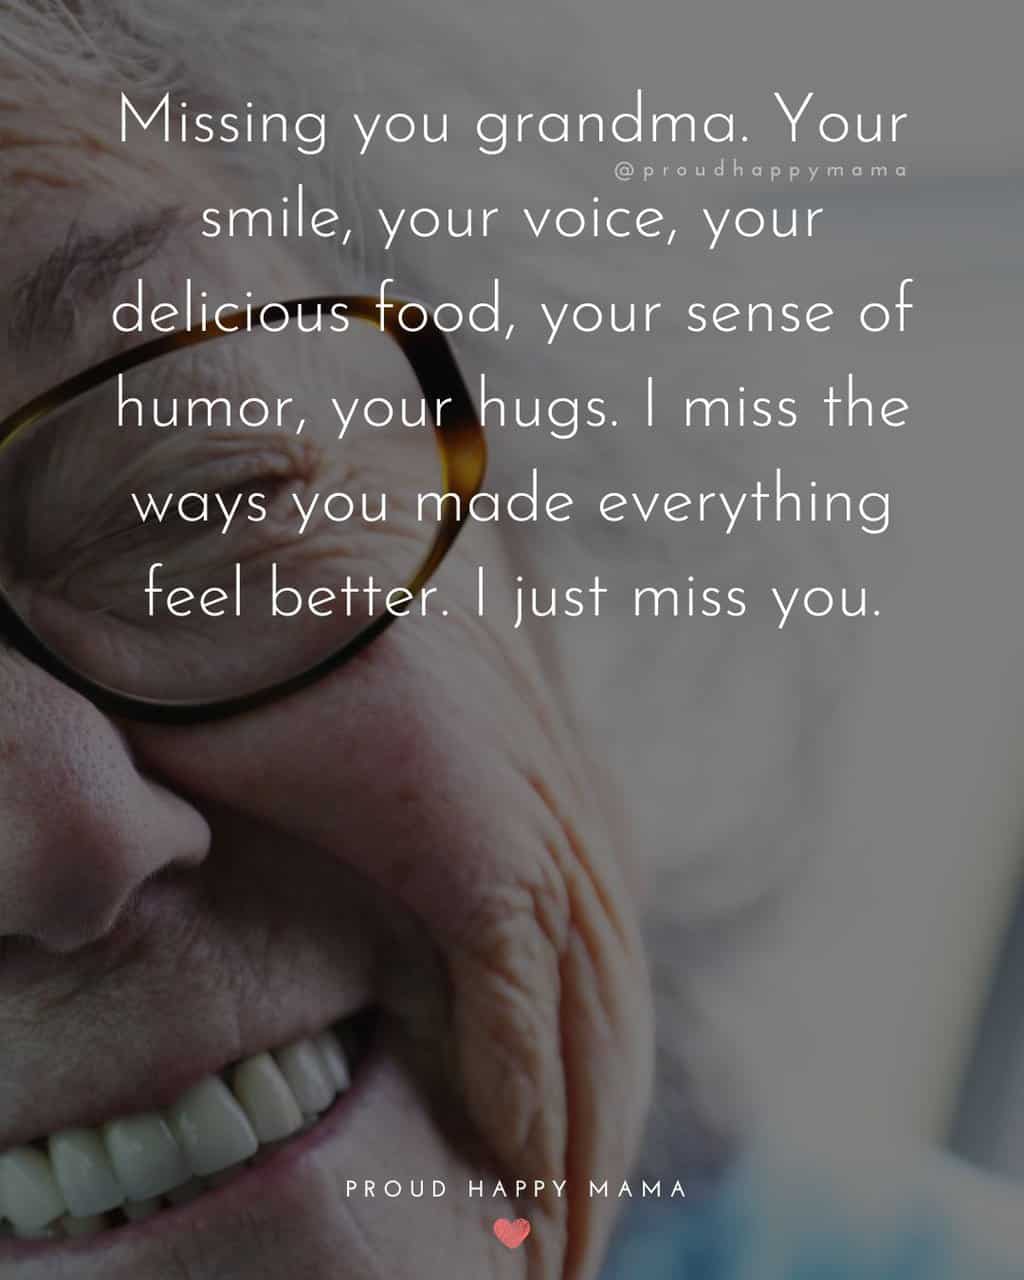 Grandma with black rimmed glasses smiling with a miss you grandma quote text overlay. ‘Missing you grandma. Your smile, your voice, your delicious food, your sense of humor, your hugs. I miss the ways you made everything feel better. I just miss you.’ 